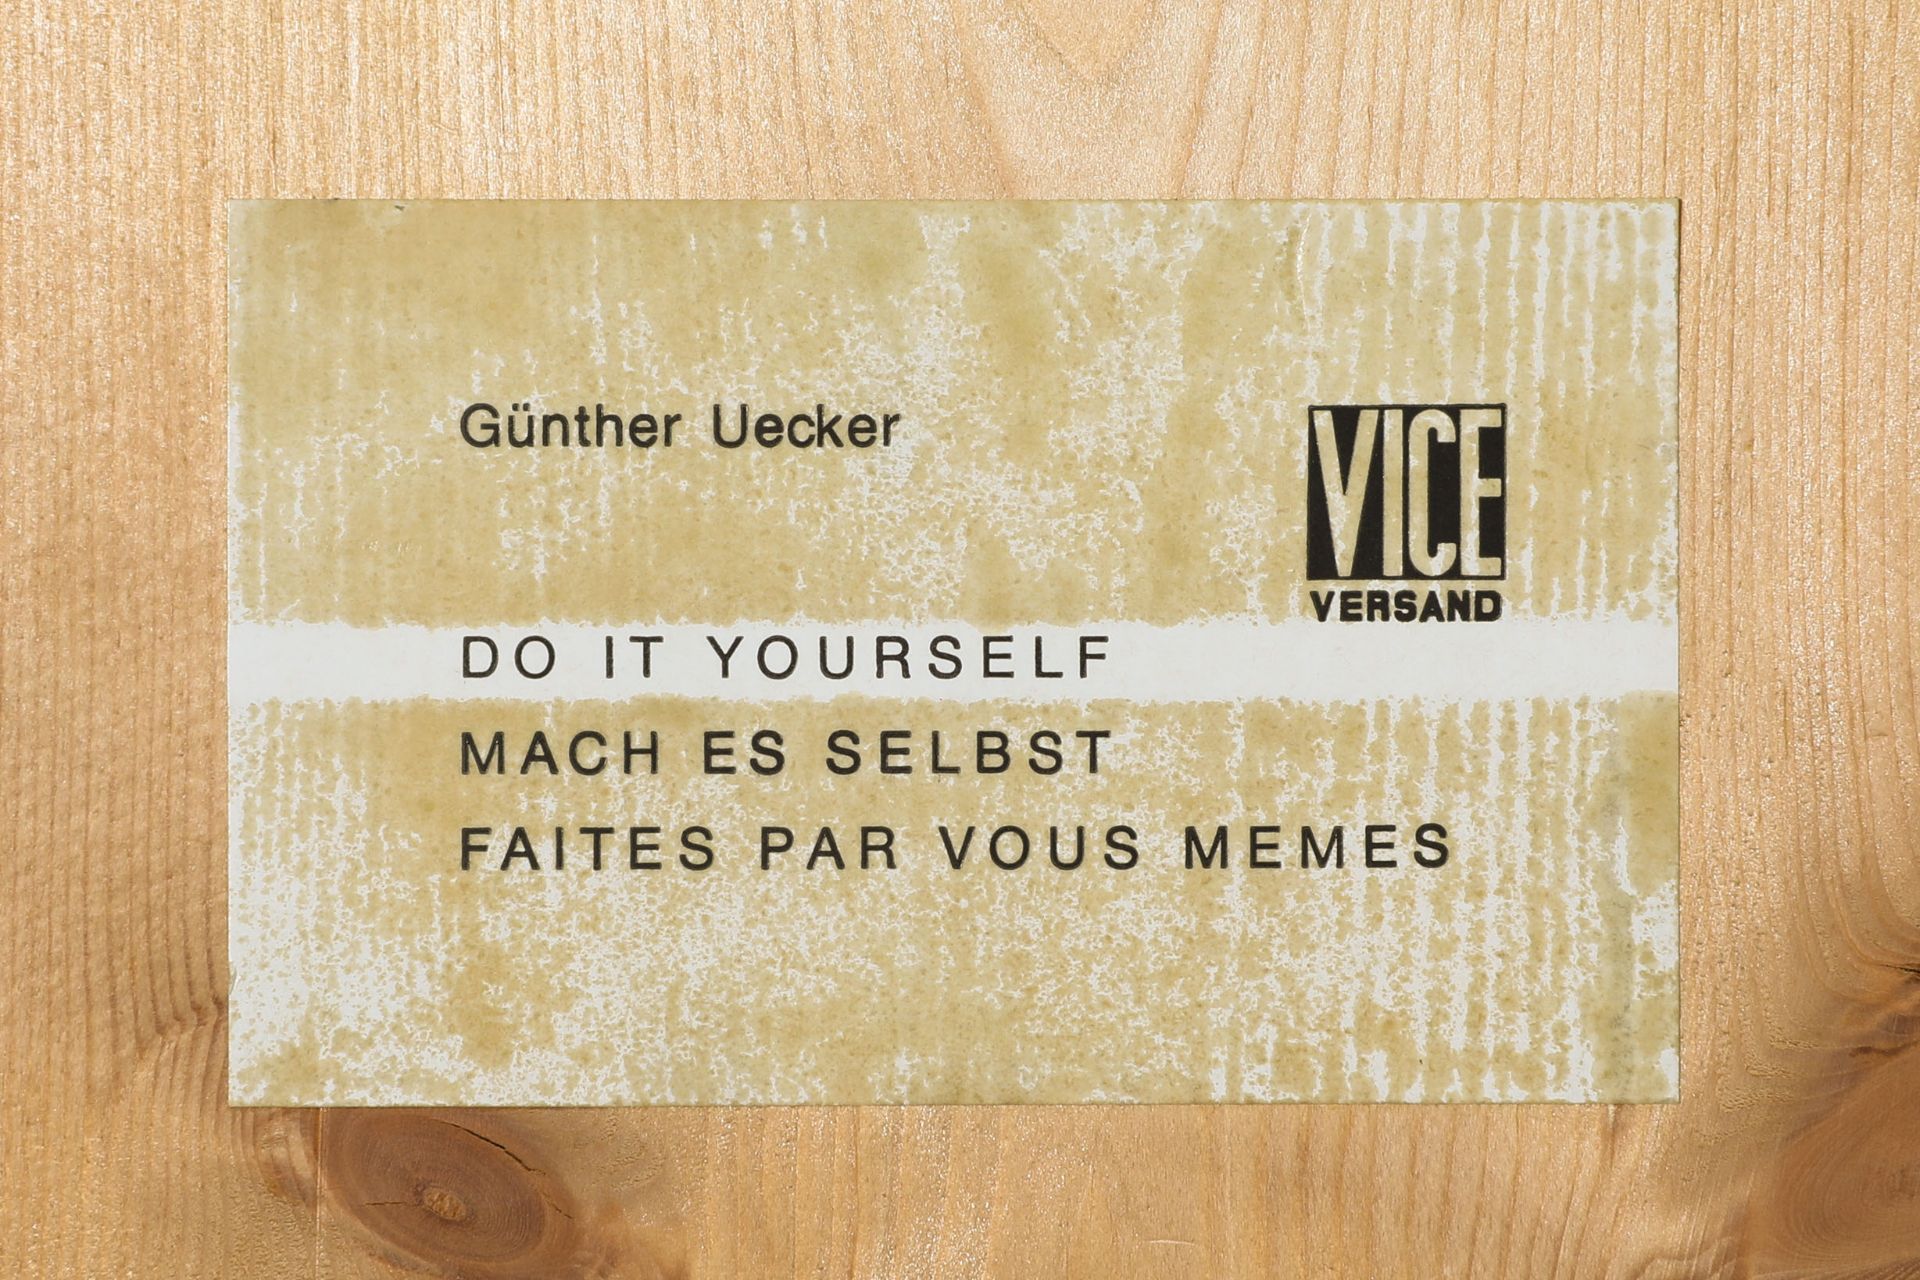 Günther Uecker*, Do it yourself, Multiple, signed, VICE VERLAG - Image 4 of 4